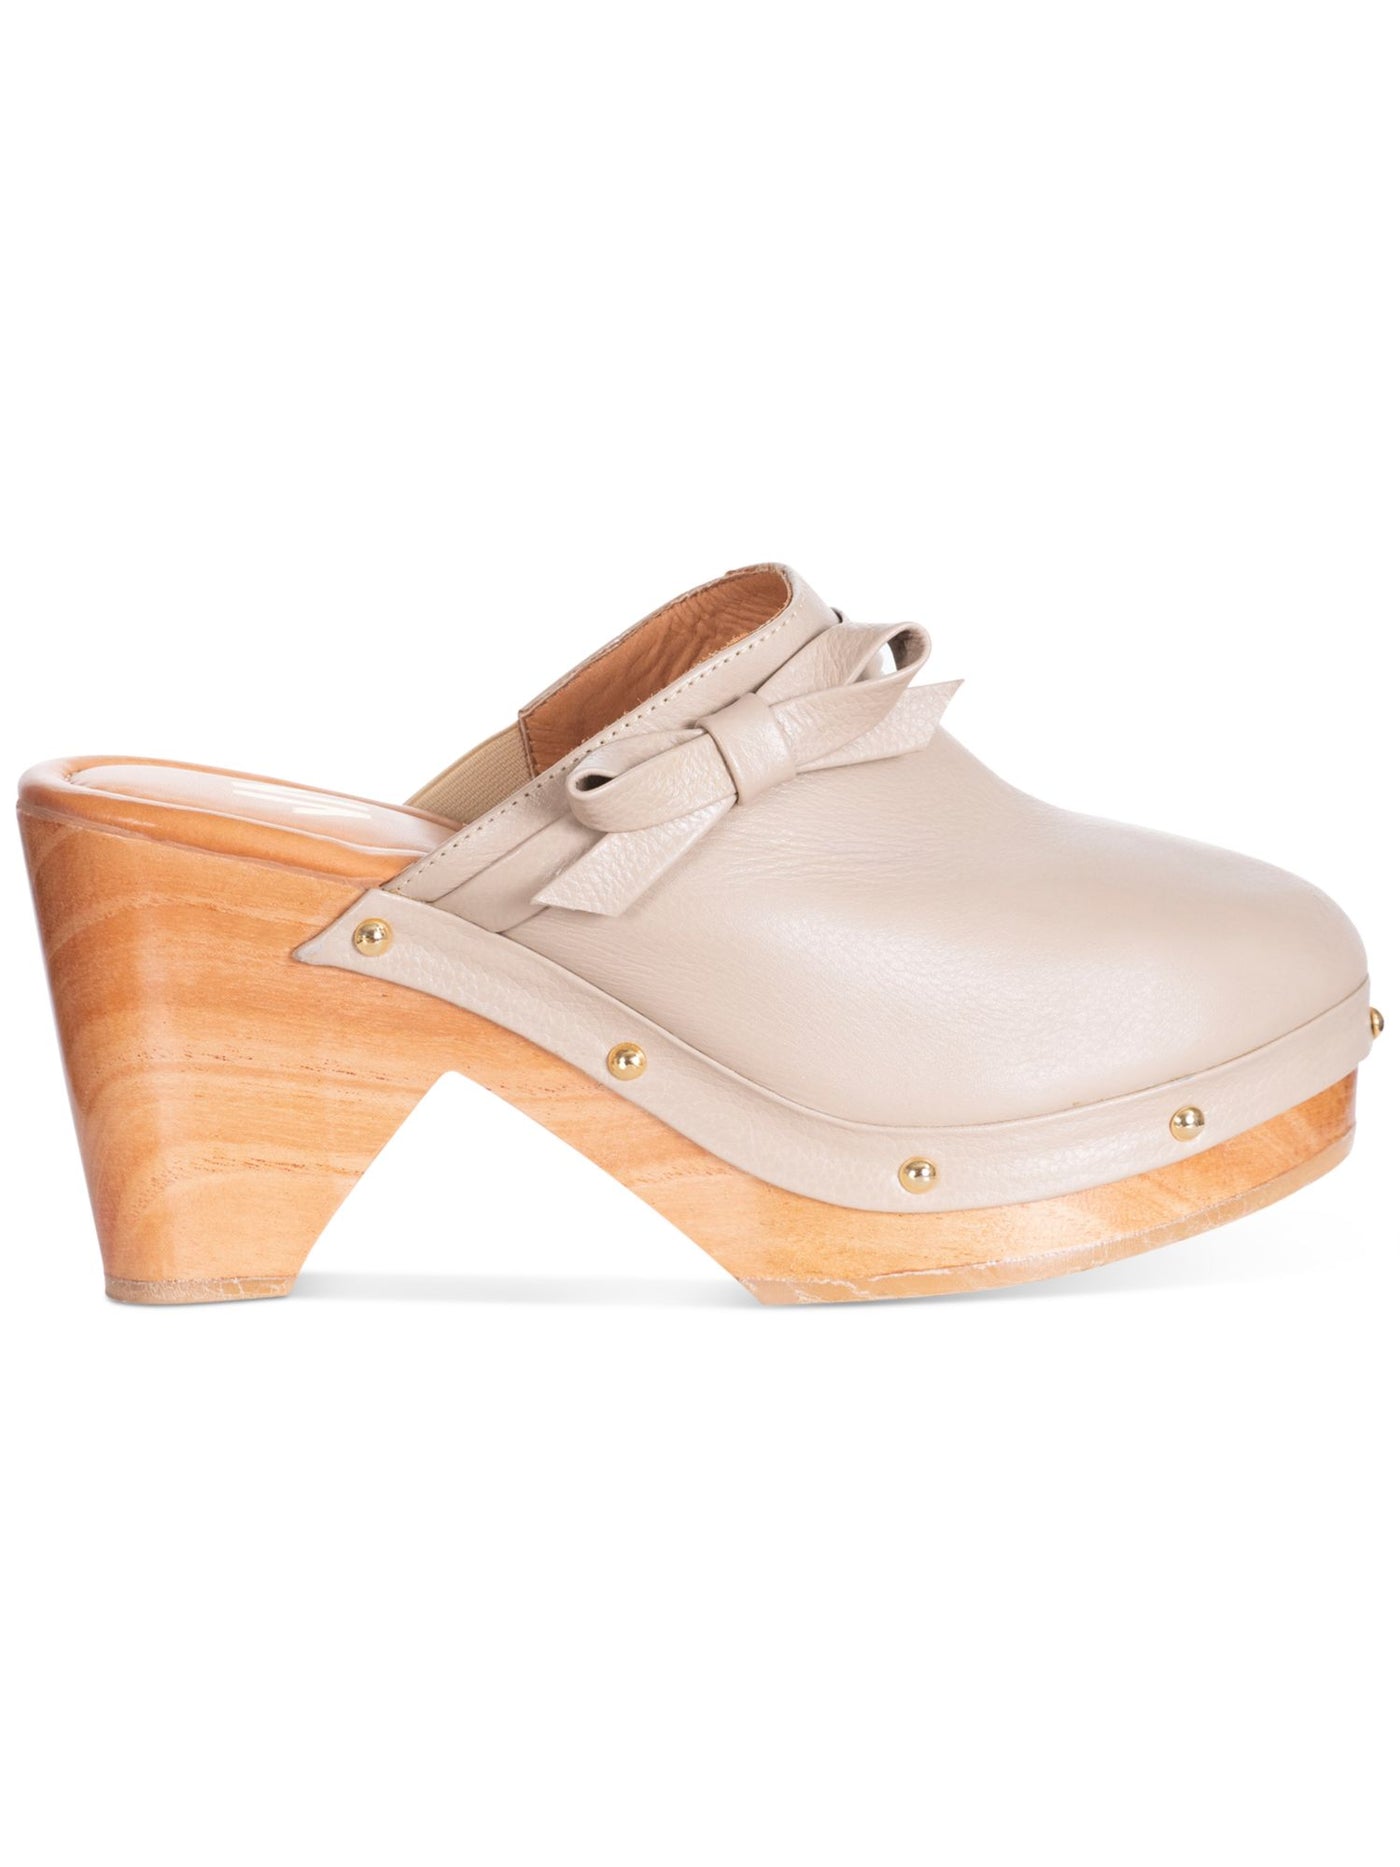 SILVIA COBOS Womens Beige 1" Platform Bow Studded Daily Round Toe Sculpted Heel Slip On Leather Clogs Shoes 8